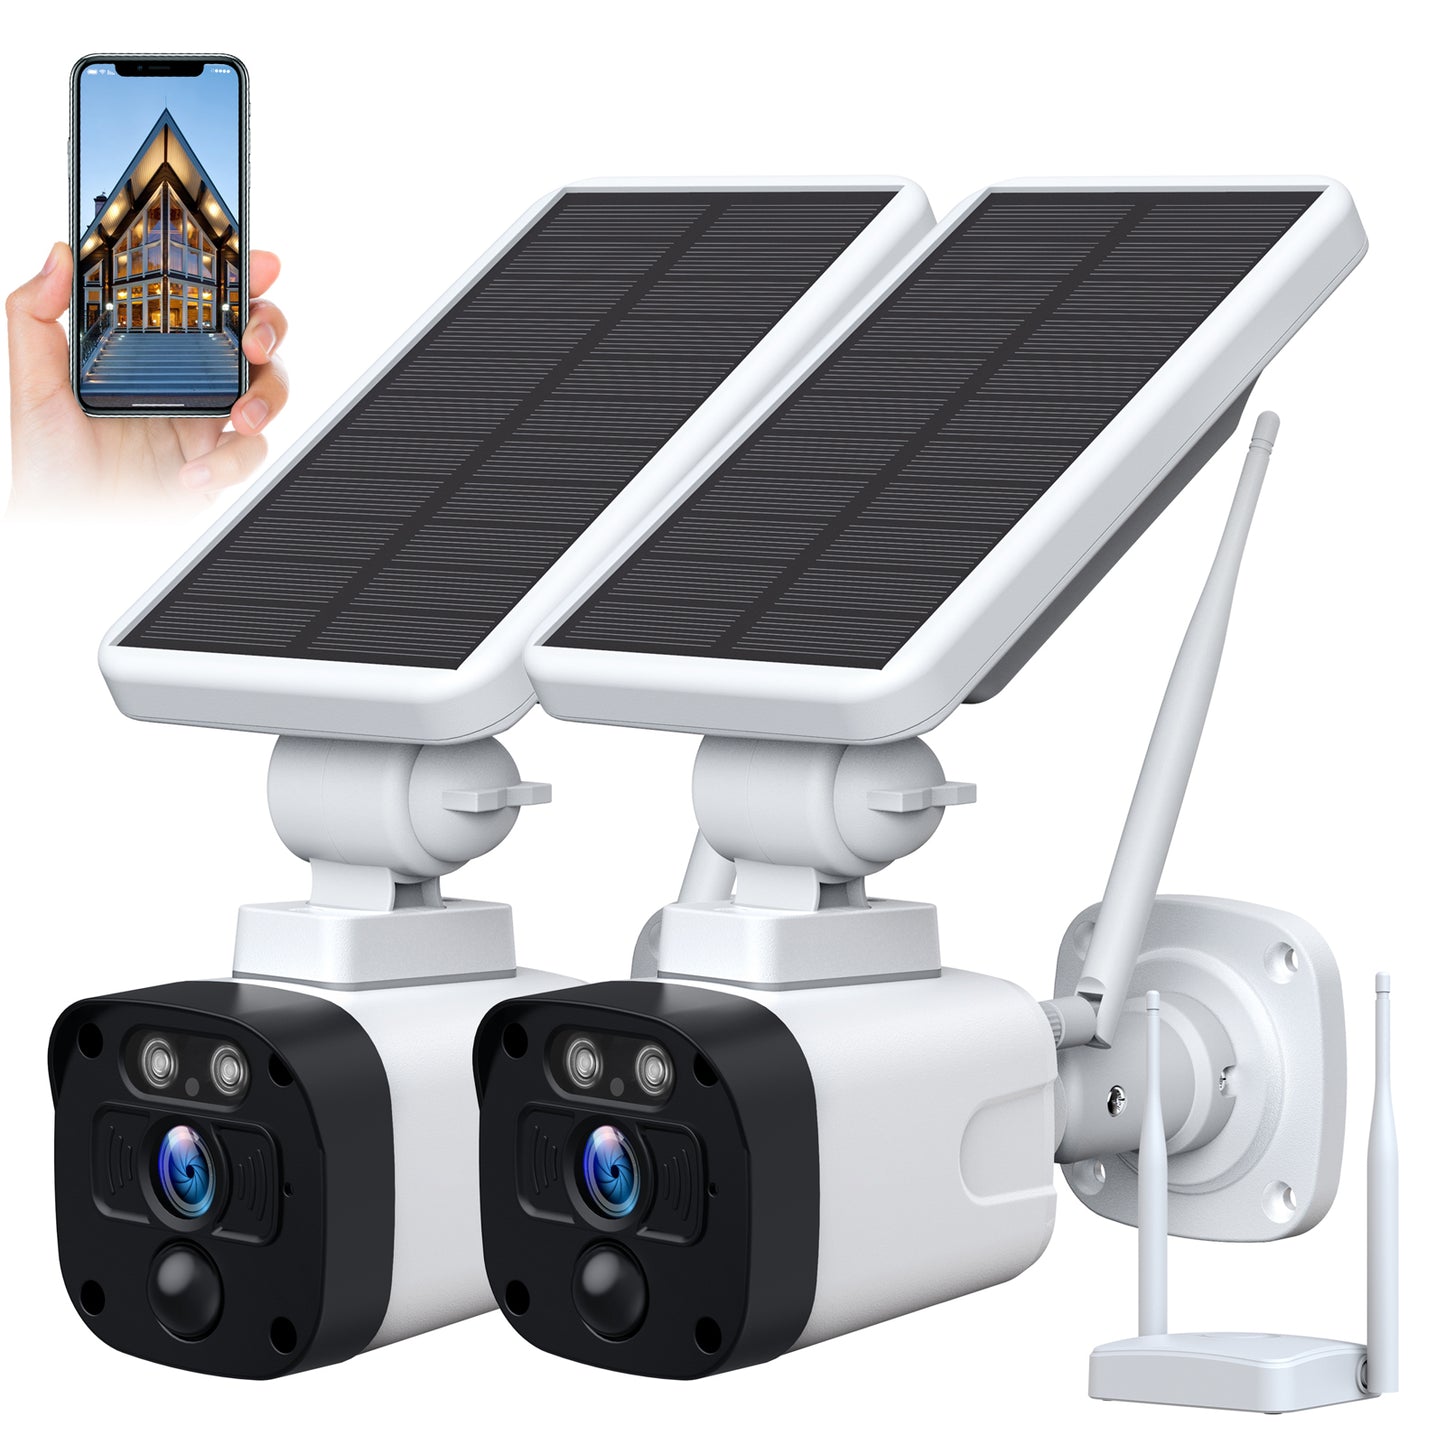 Solar Wiireless Security Cameras System with Night Vision